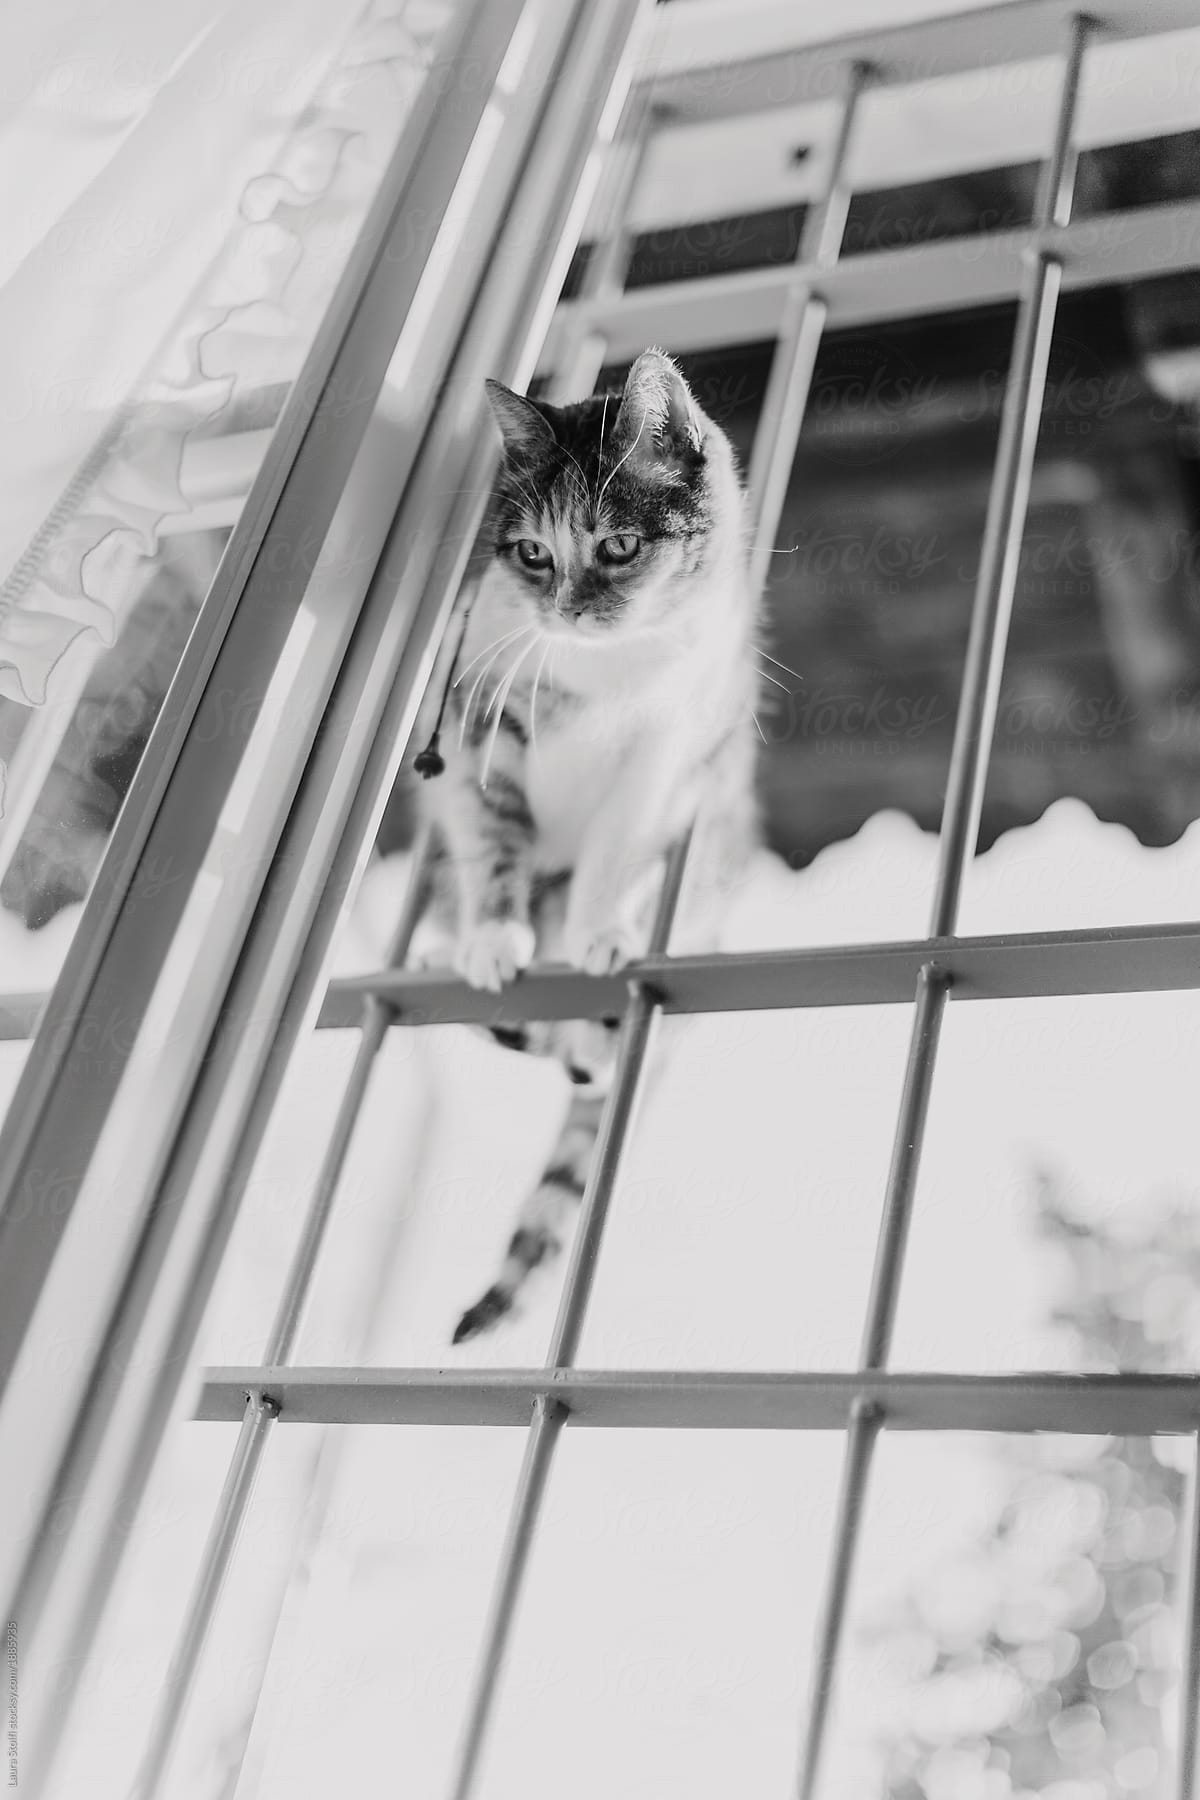 Cat sits on window's grate and looks down. Black and white.